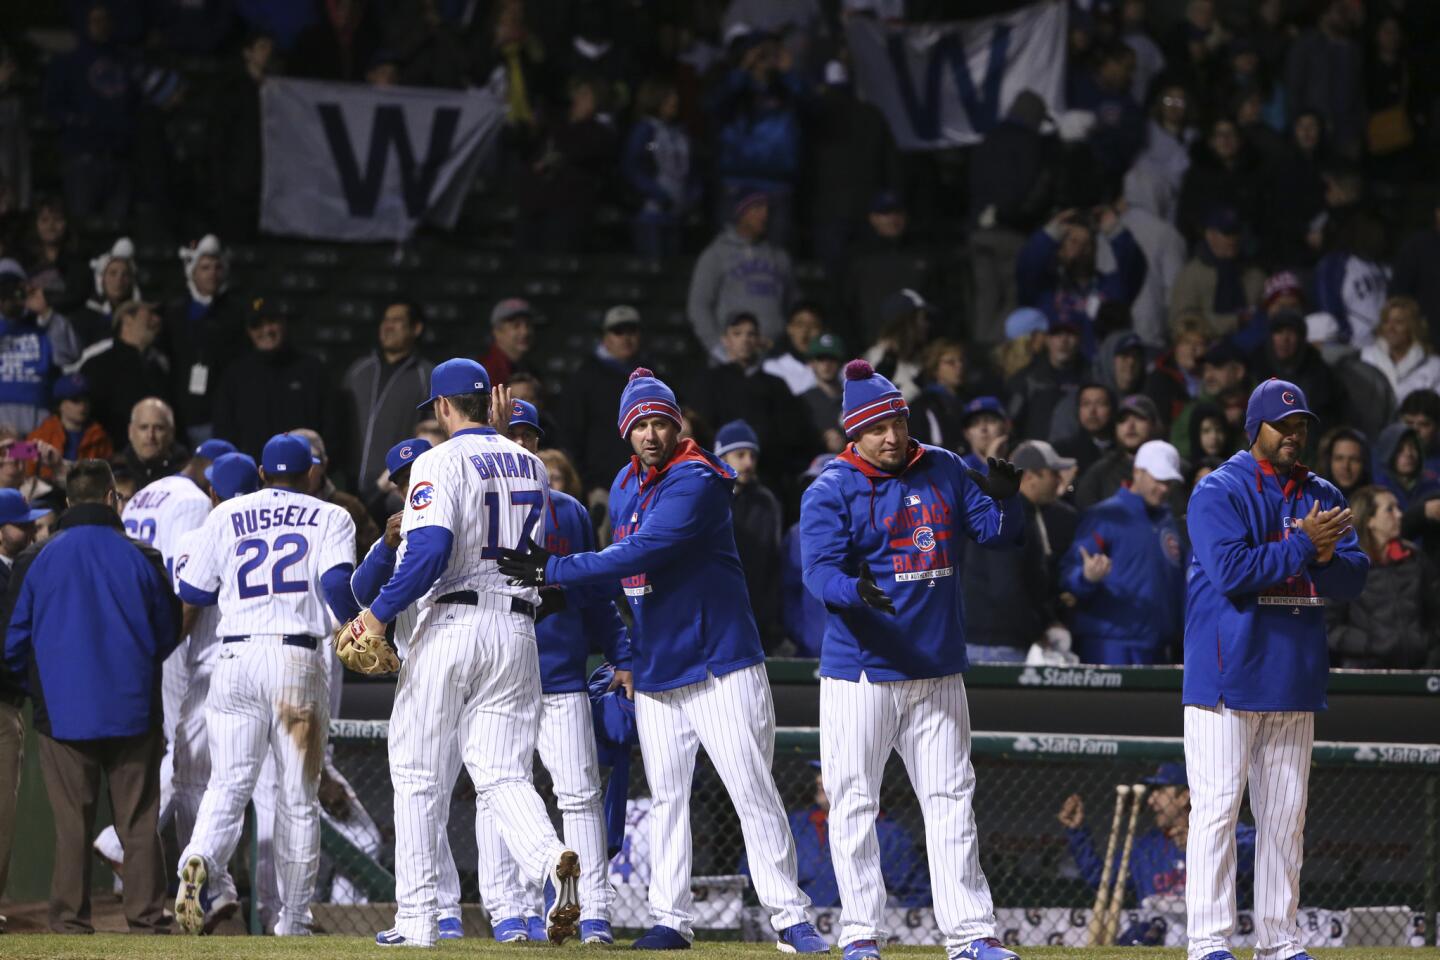 Cubs players celebrate after defeating the Pittsburgh Pirates 6-2.